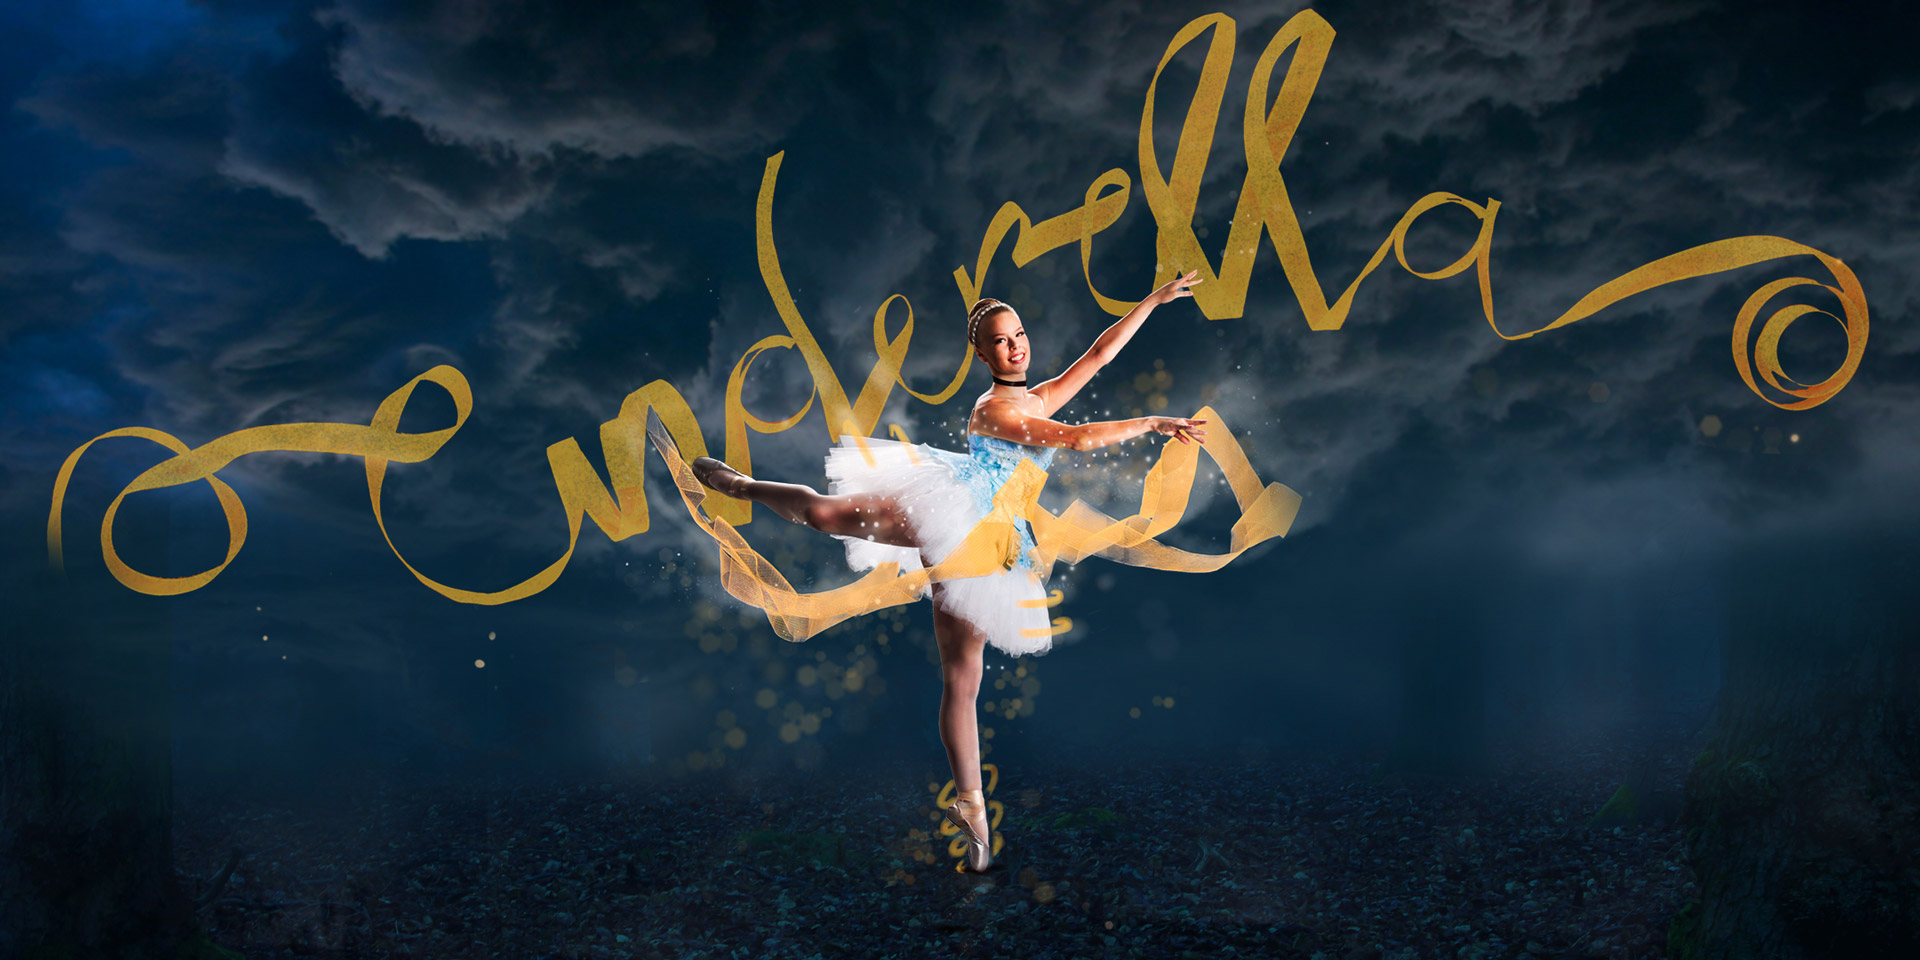 Dark, cloudy background with ballerina in short blue costume and Cinderella written in gold ribbon in foreground